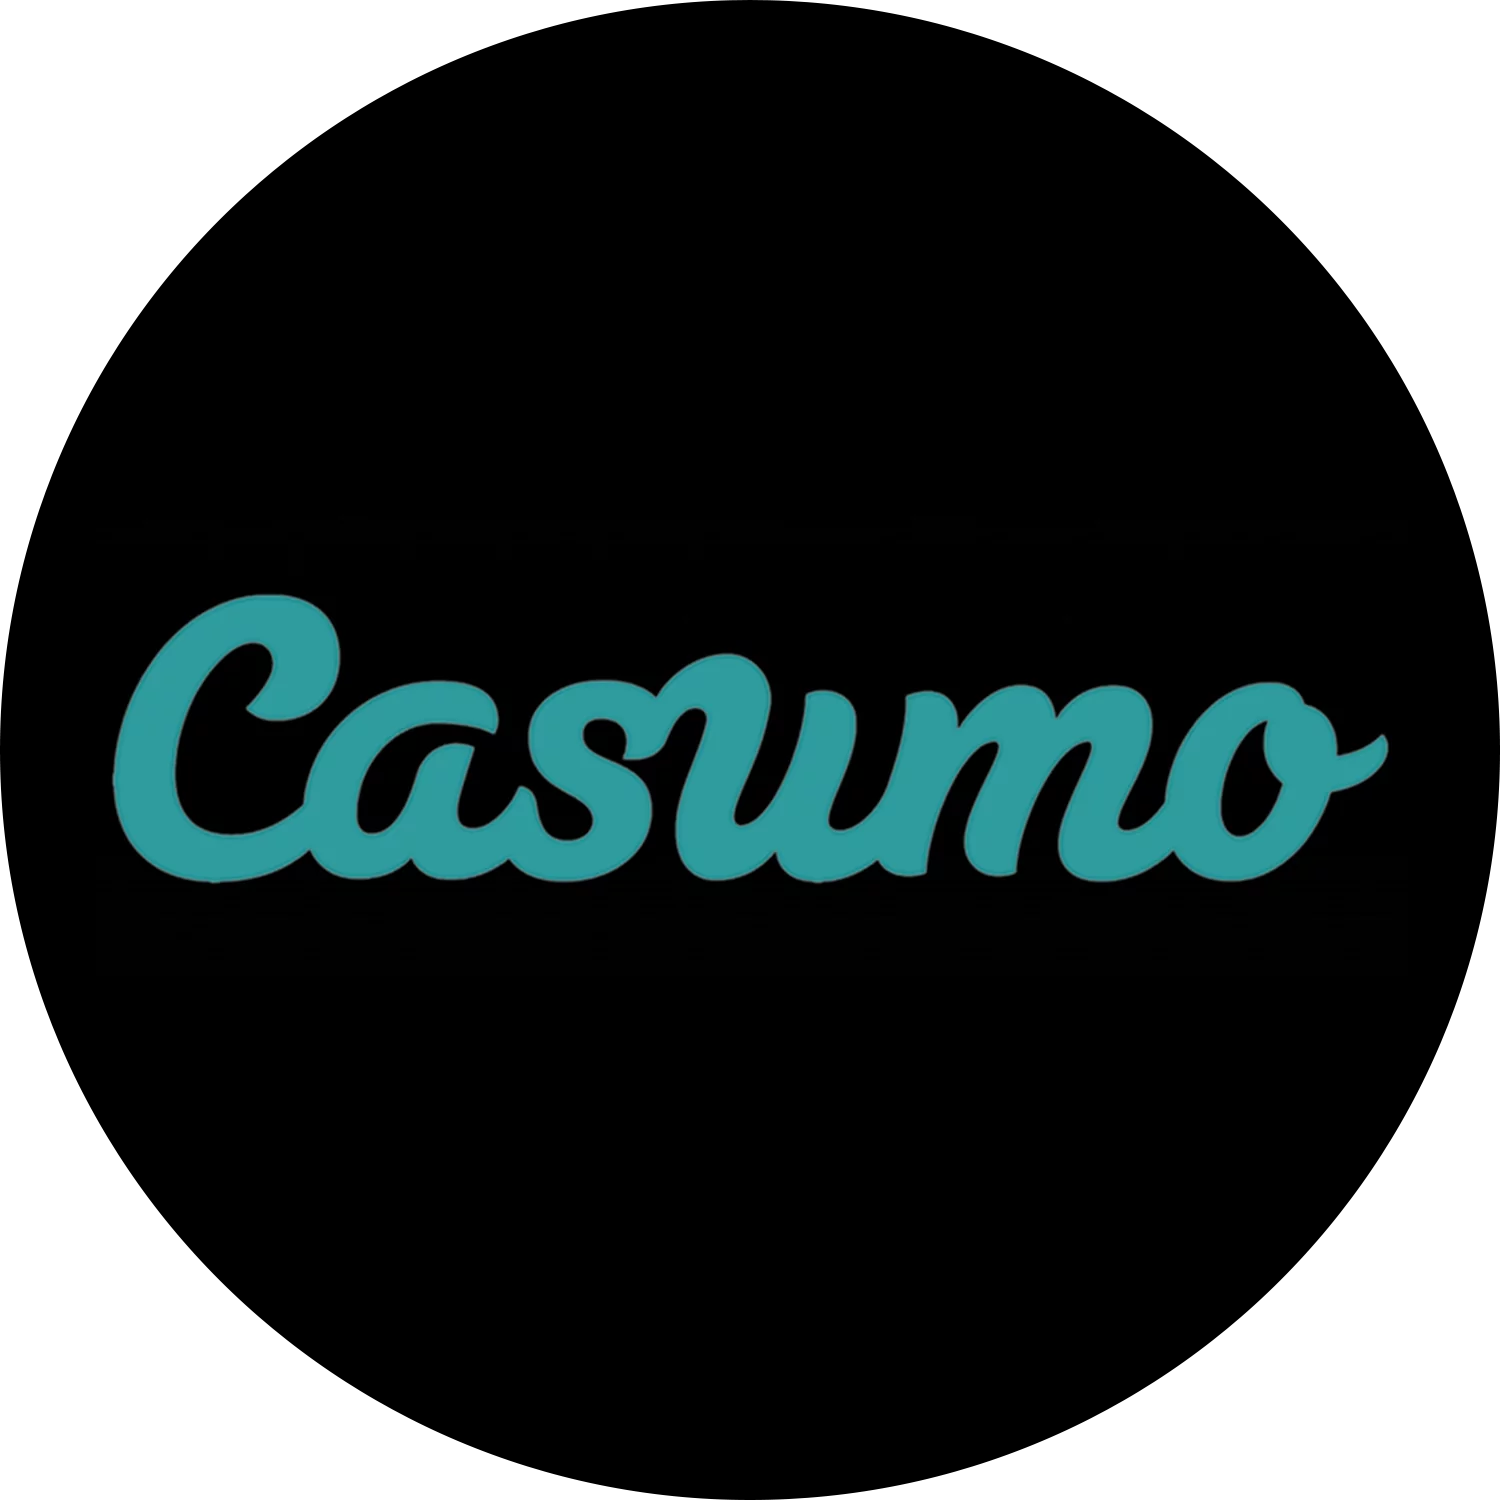 Sign up for Casumo Casino and play Indian casino games.